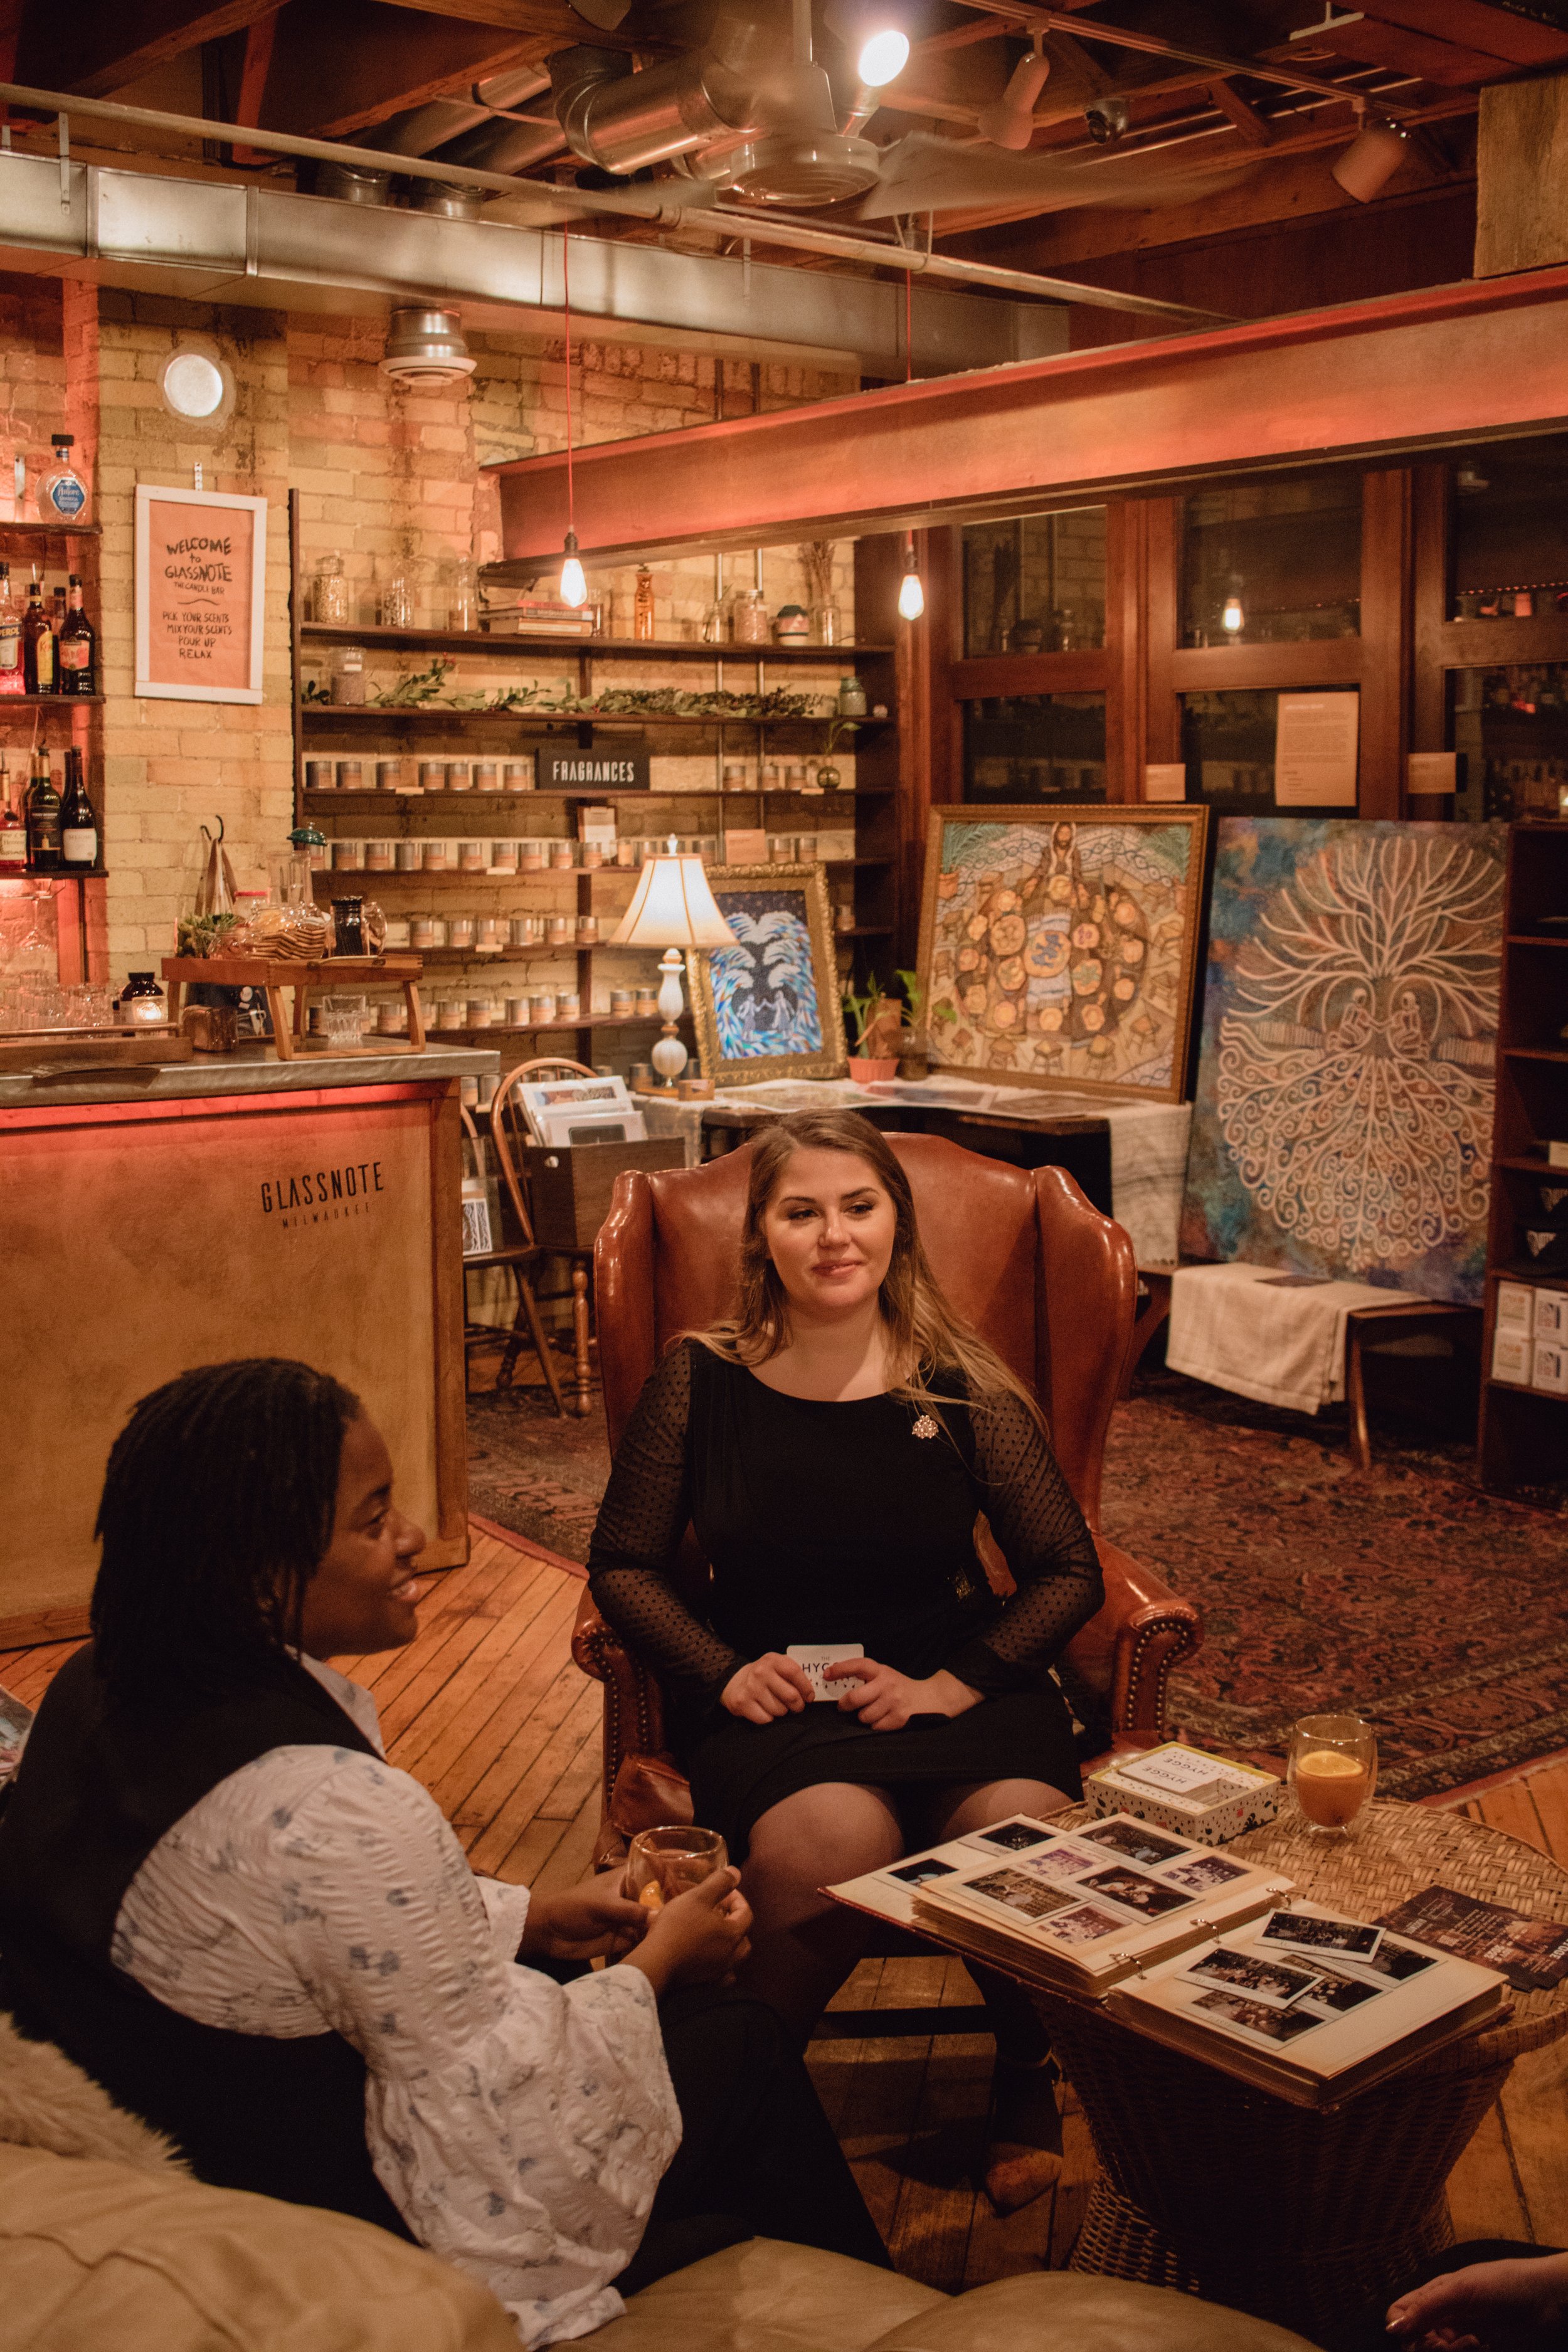  Milwaukee artist and curator, Lauren Marie Nitka, sitting in an arm chair with the art of  Jonathan Shaw of Yehonatan Art  in the background, meets with VIP guest at Hygge: A Pop Up Gallery at  Glassnote Candle Bar,  in Walker’s Point, WI in a cream